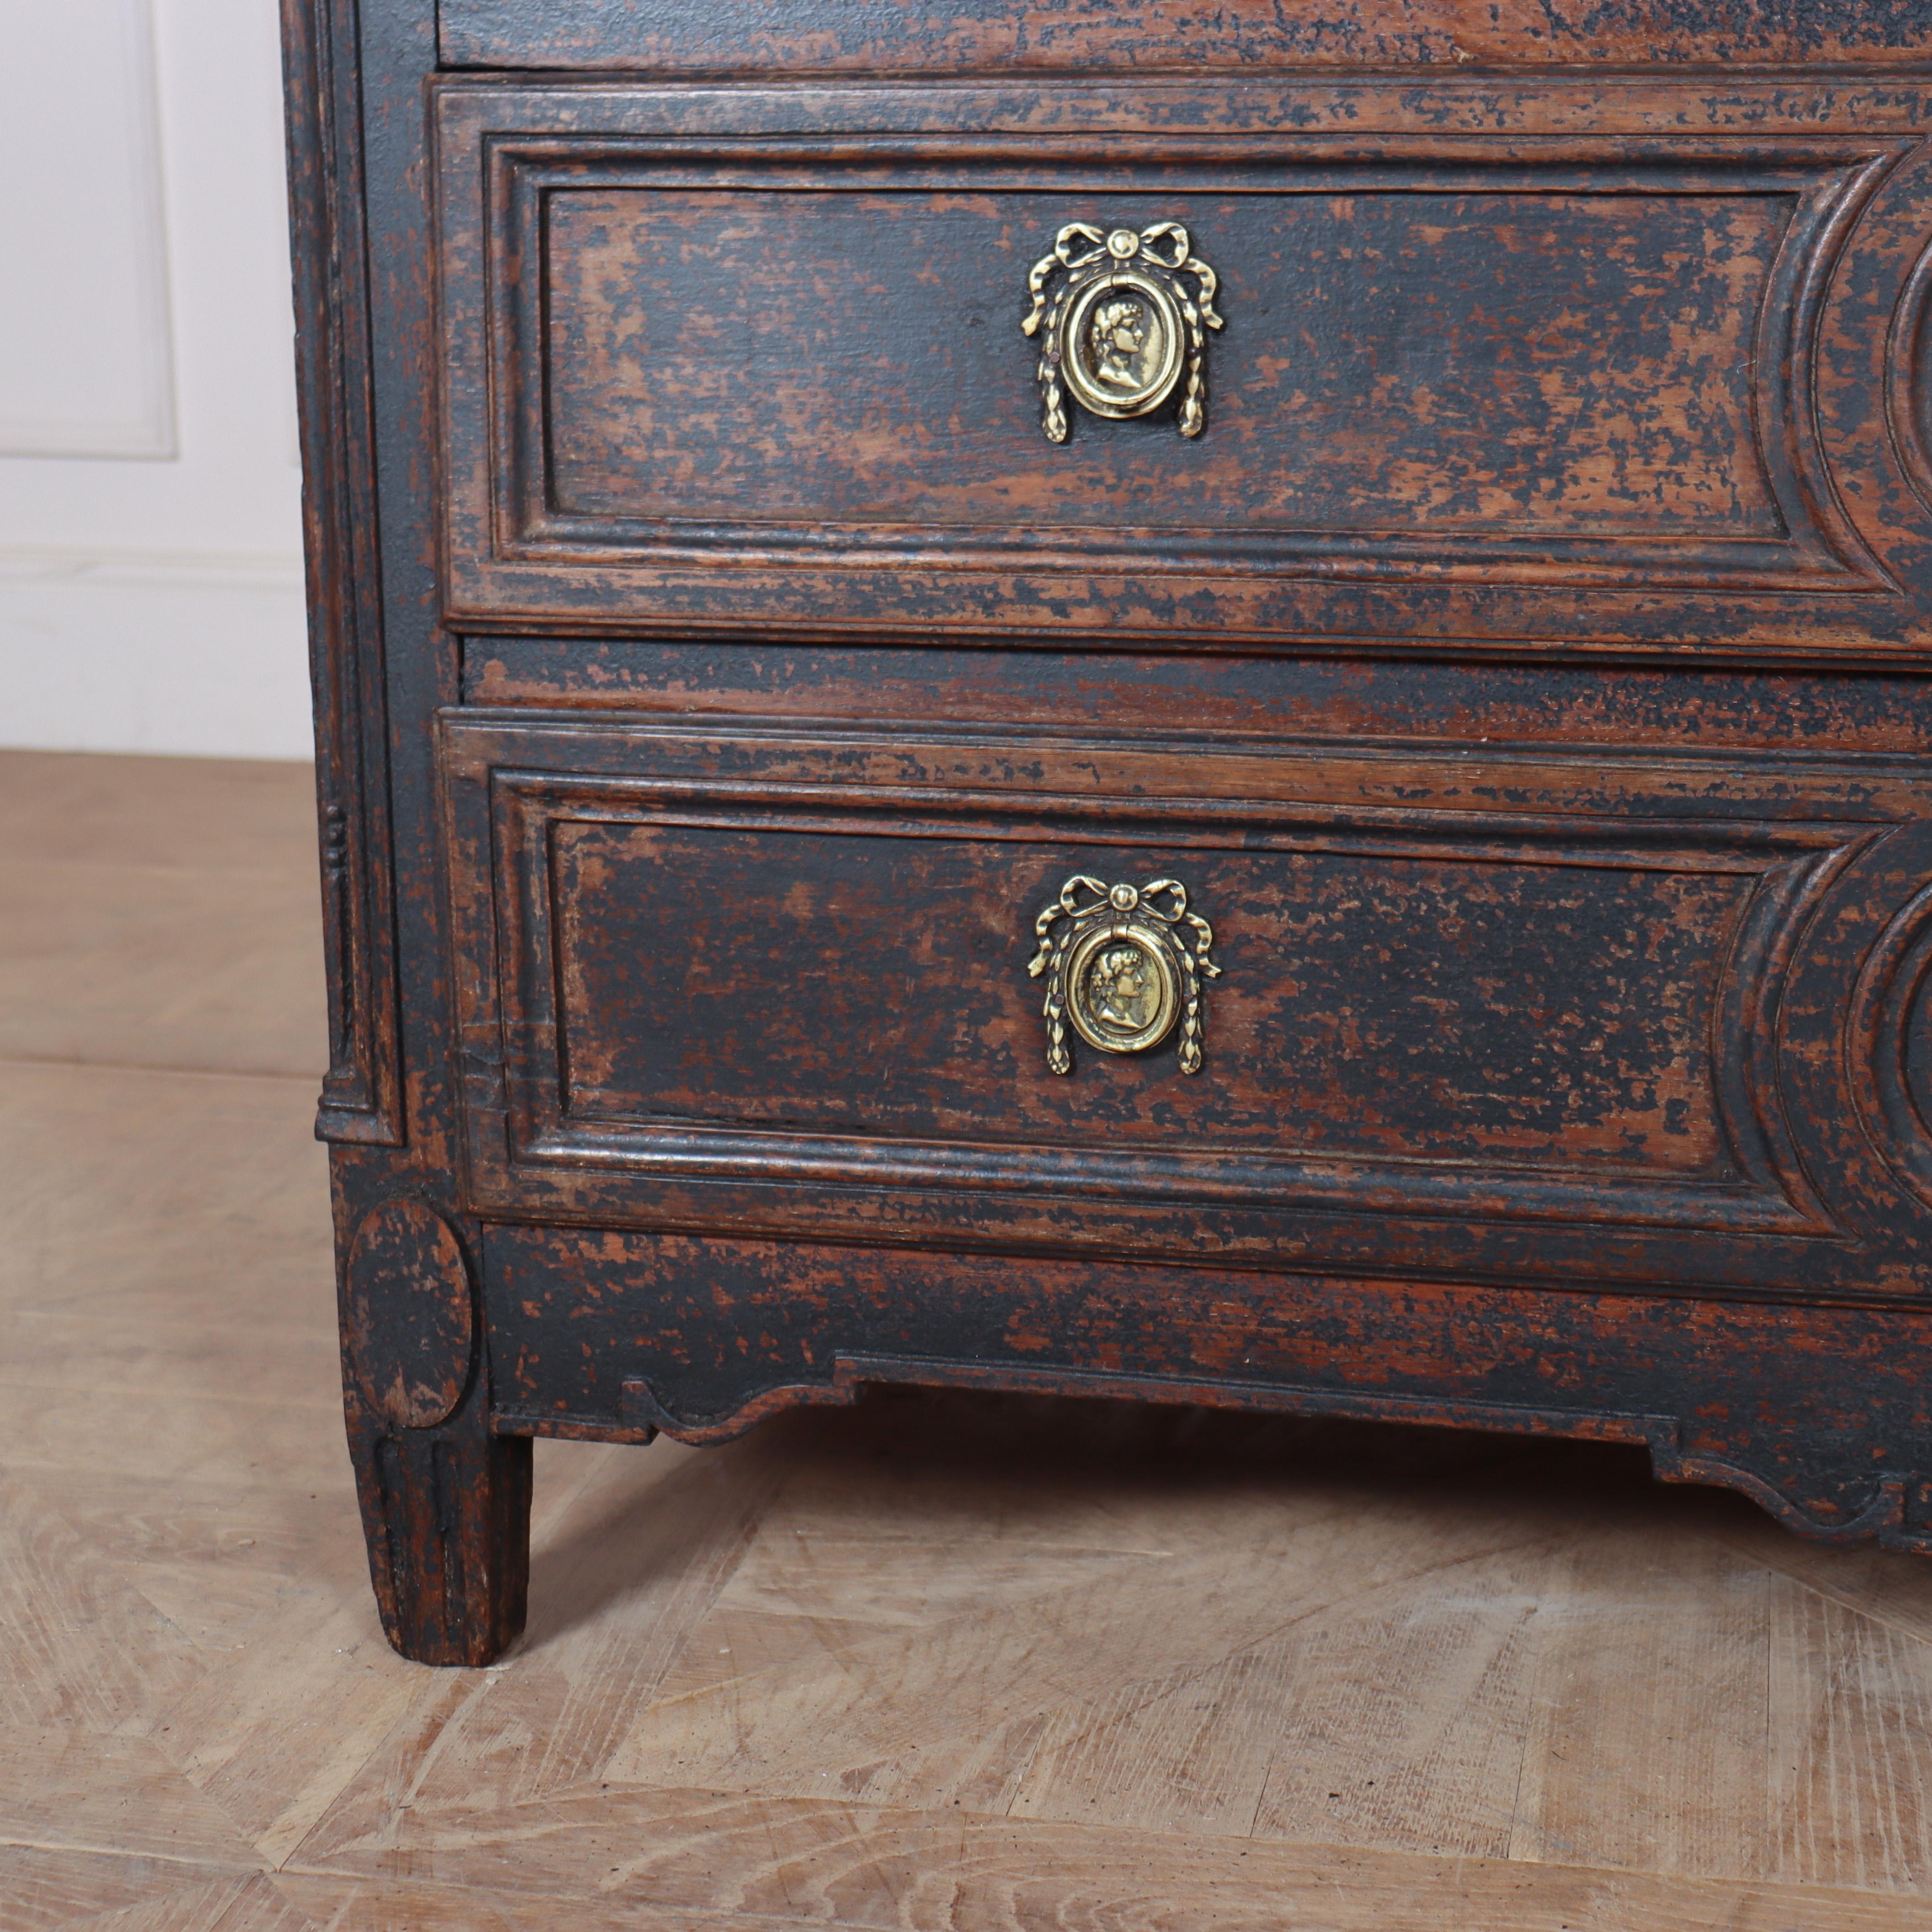 18th C French painted oak commode with carved decoration. 1790.

Reference: 7925

Dimensions
48.5 inches (123 cms) Wide
24 inches (61 cms) Deep
37.5 inches (95 cms) High